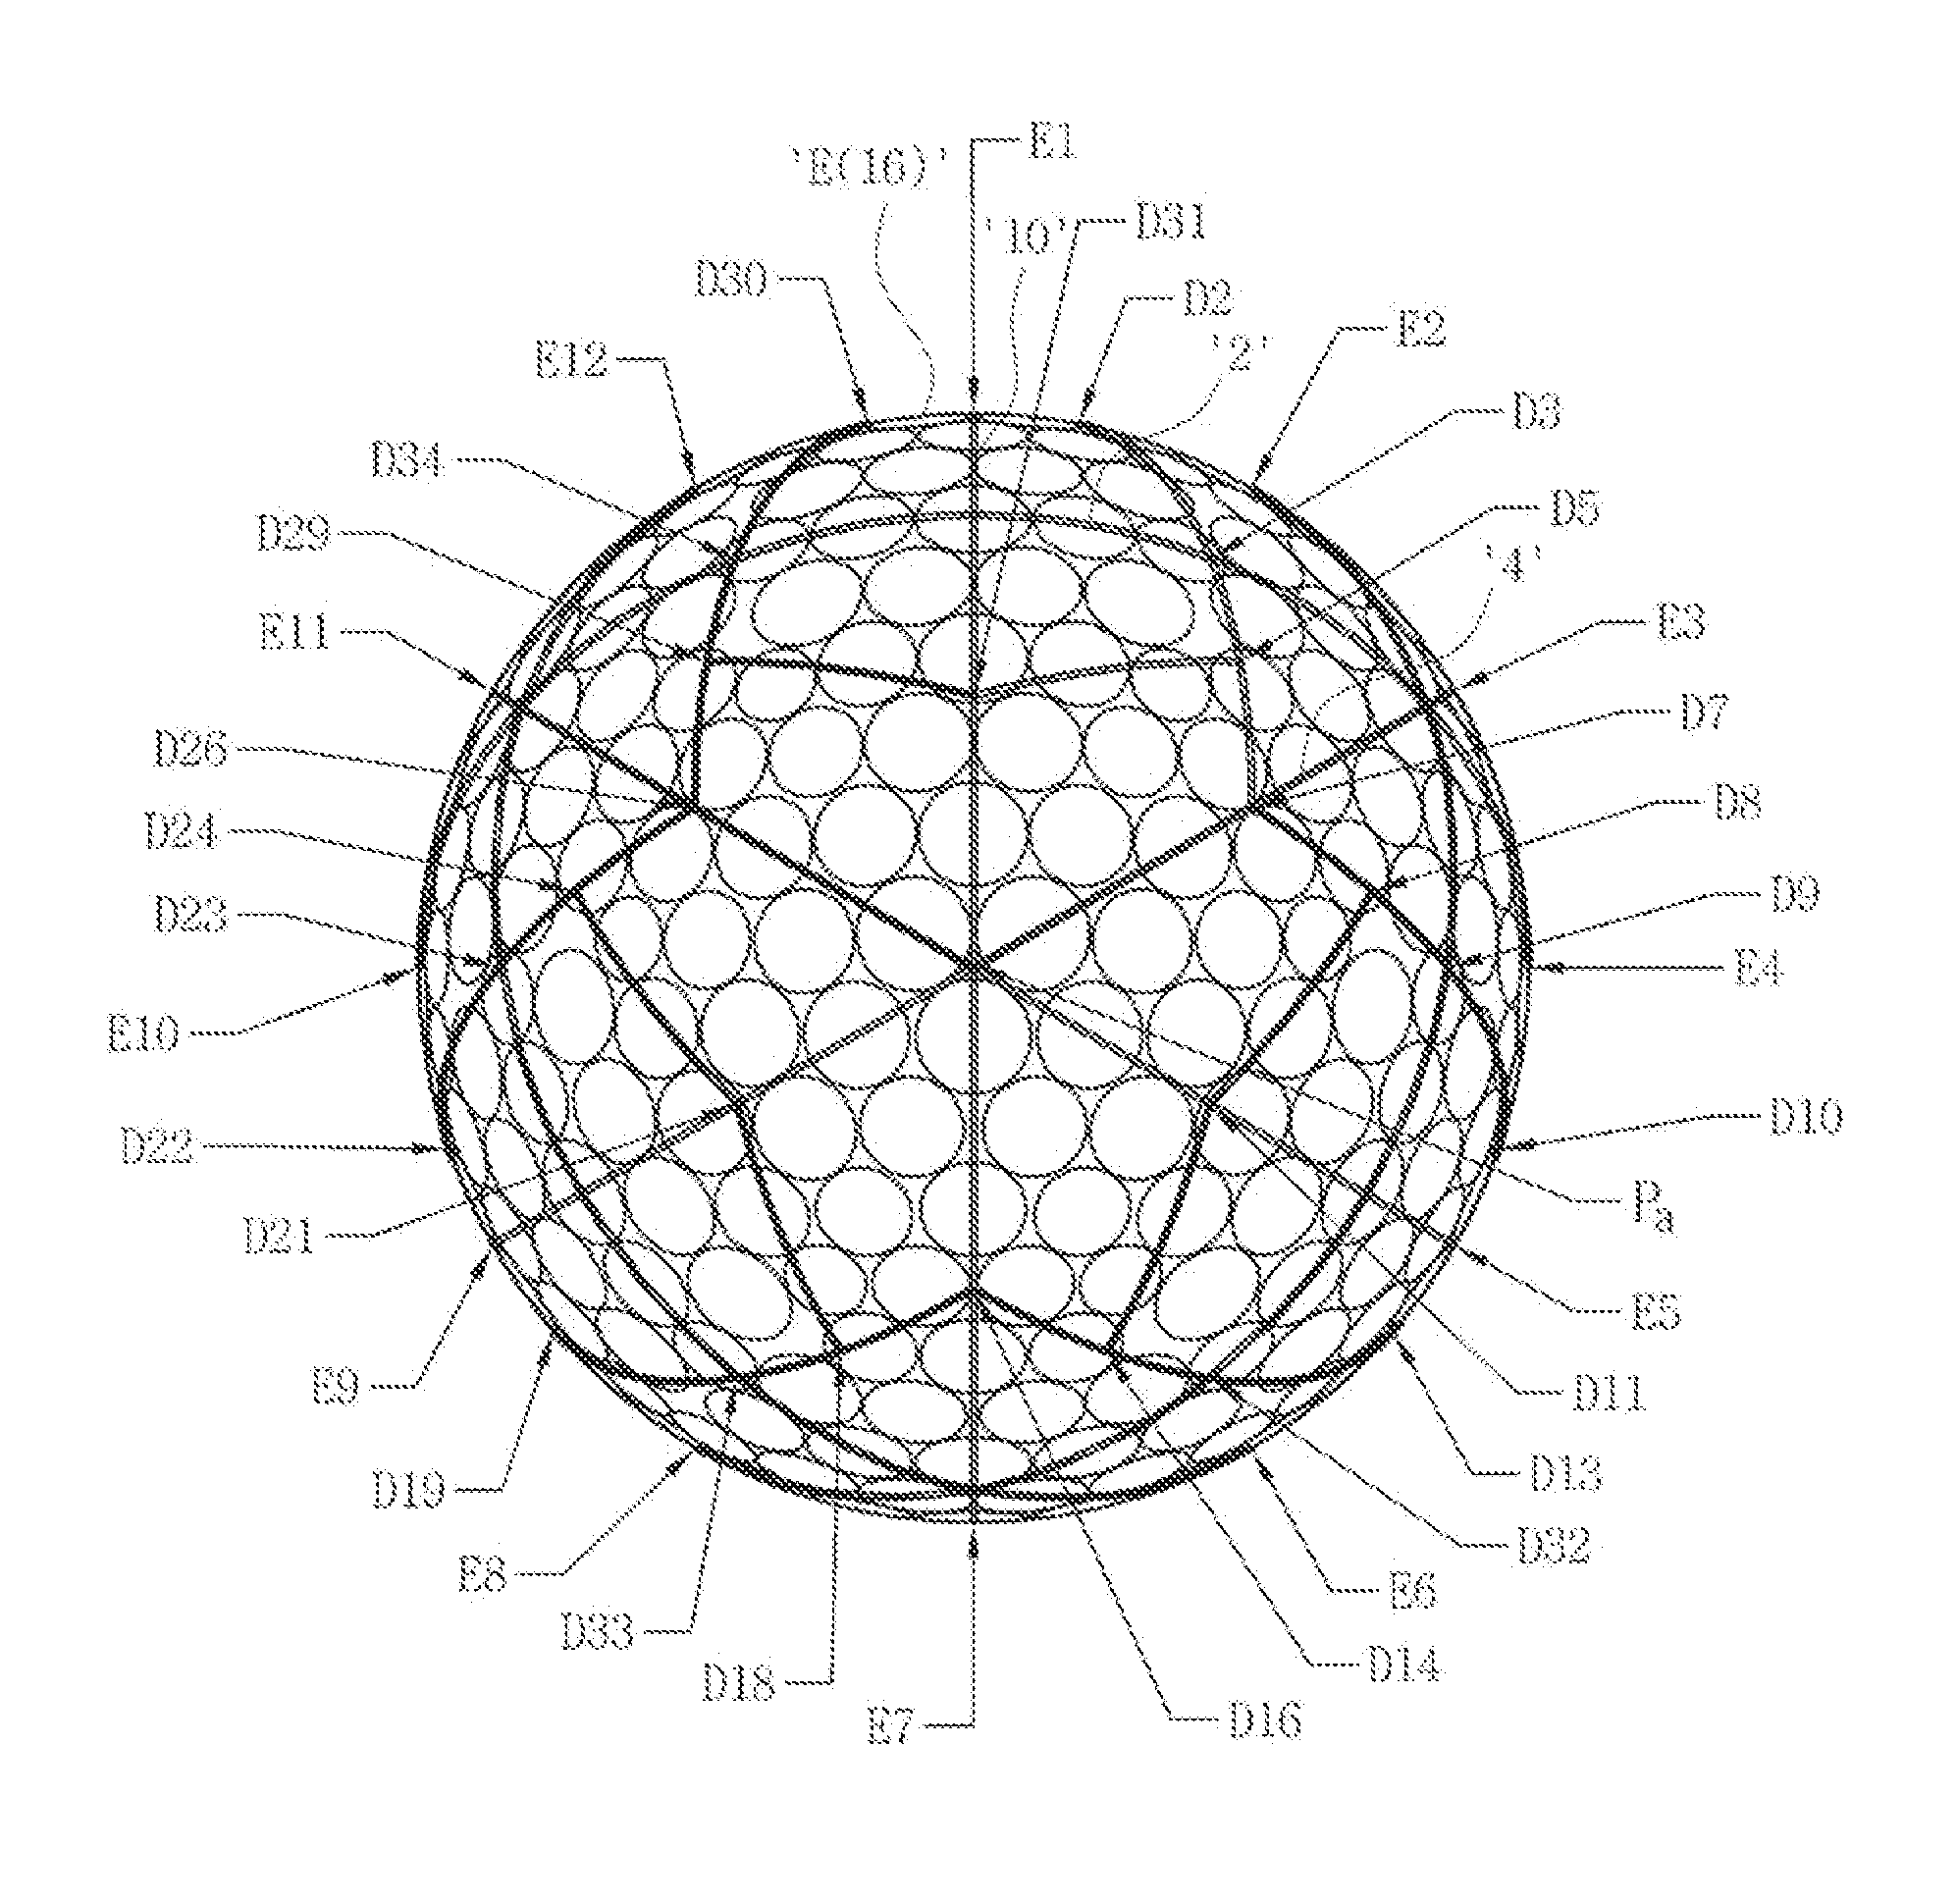 Golf ball with dimple pattern arranged in spherical polygons having sides with different lengths